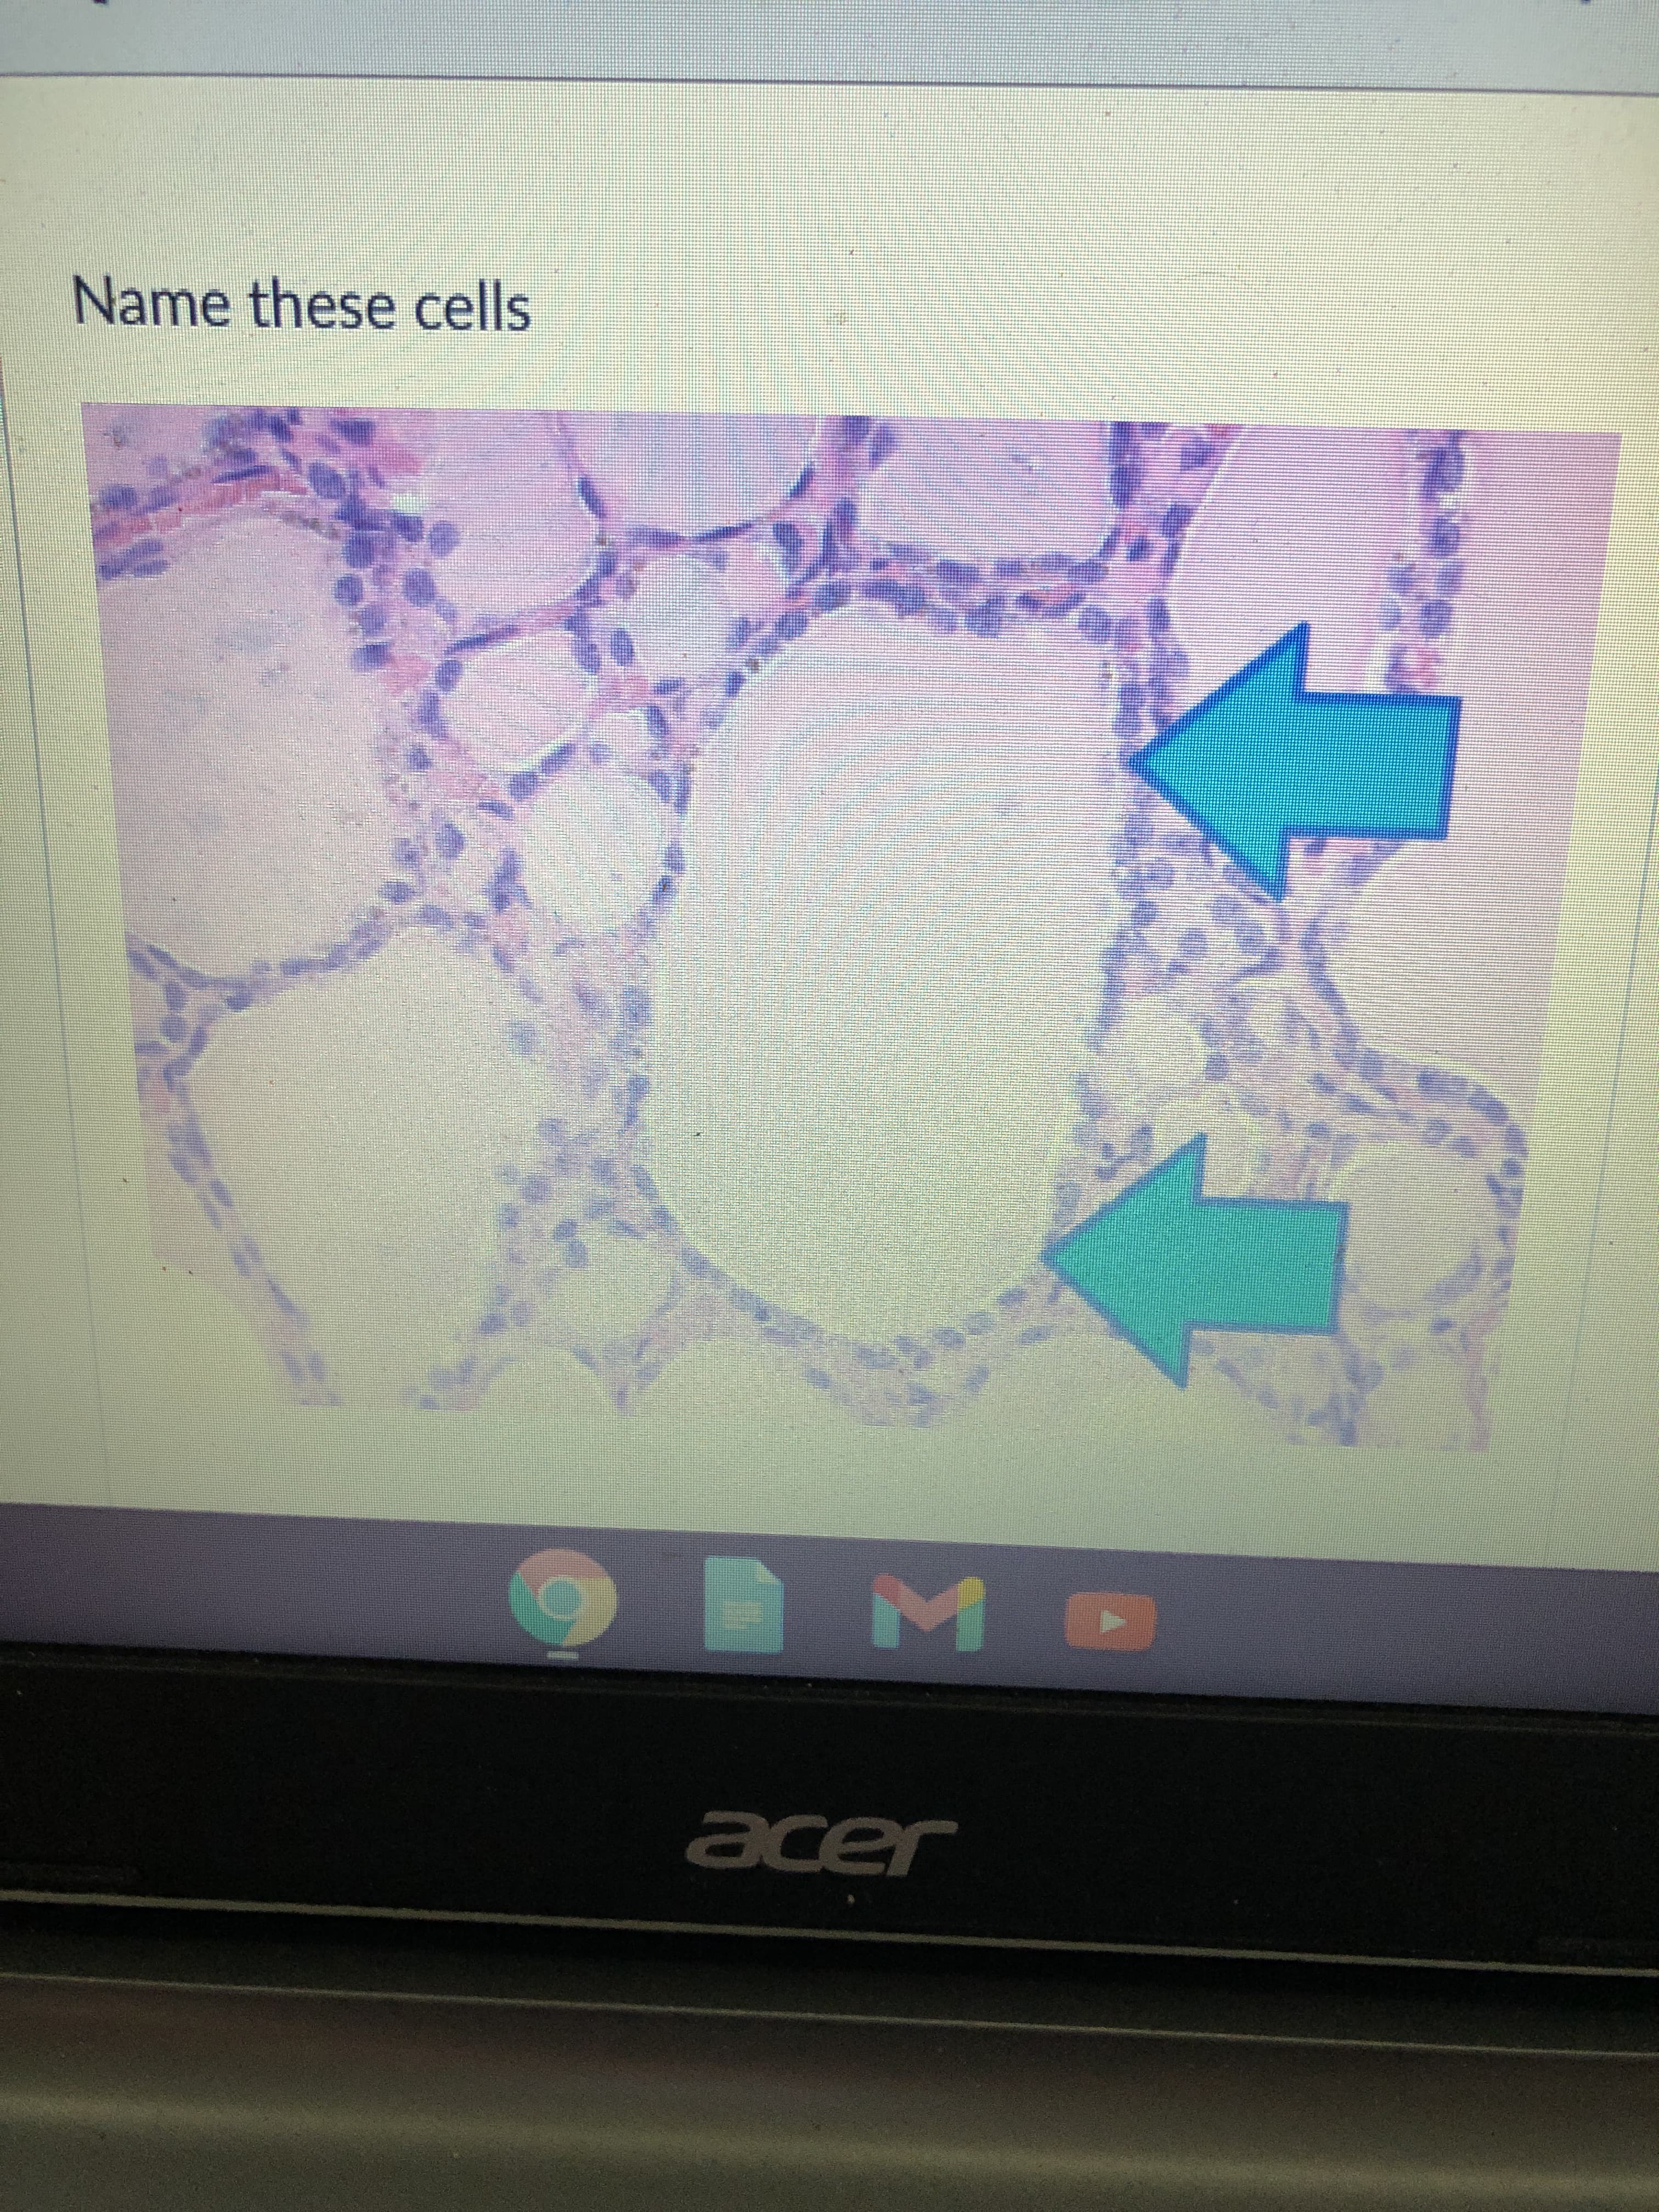 Name these cells
